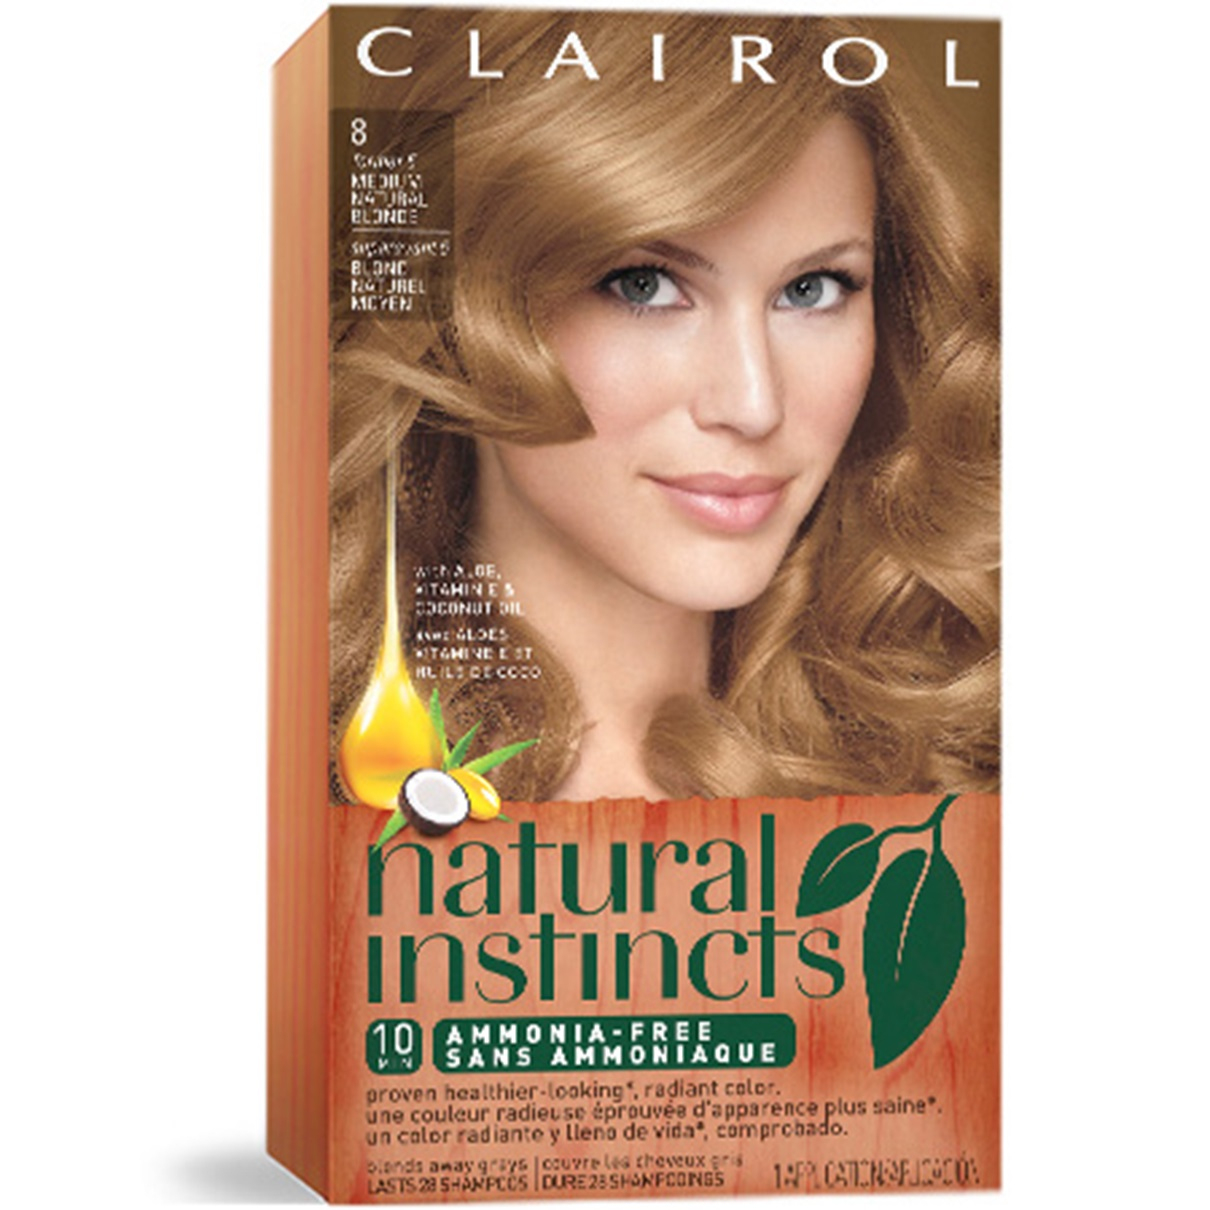 Buy One, Get One Free Clairol Hair Color Printable Coupon - Money - Free Hair Dye Coupons Printable